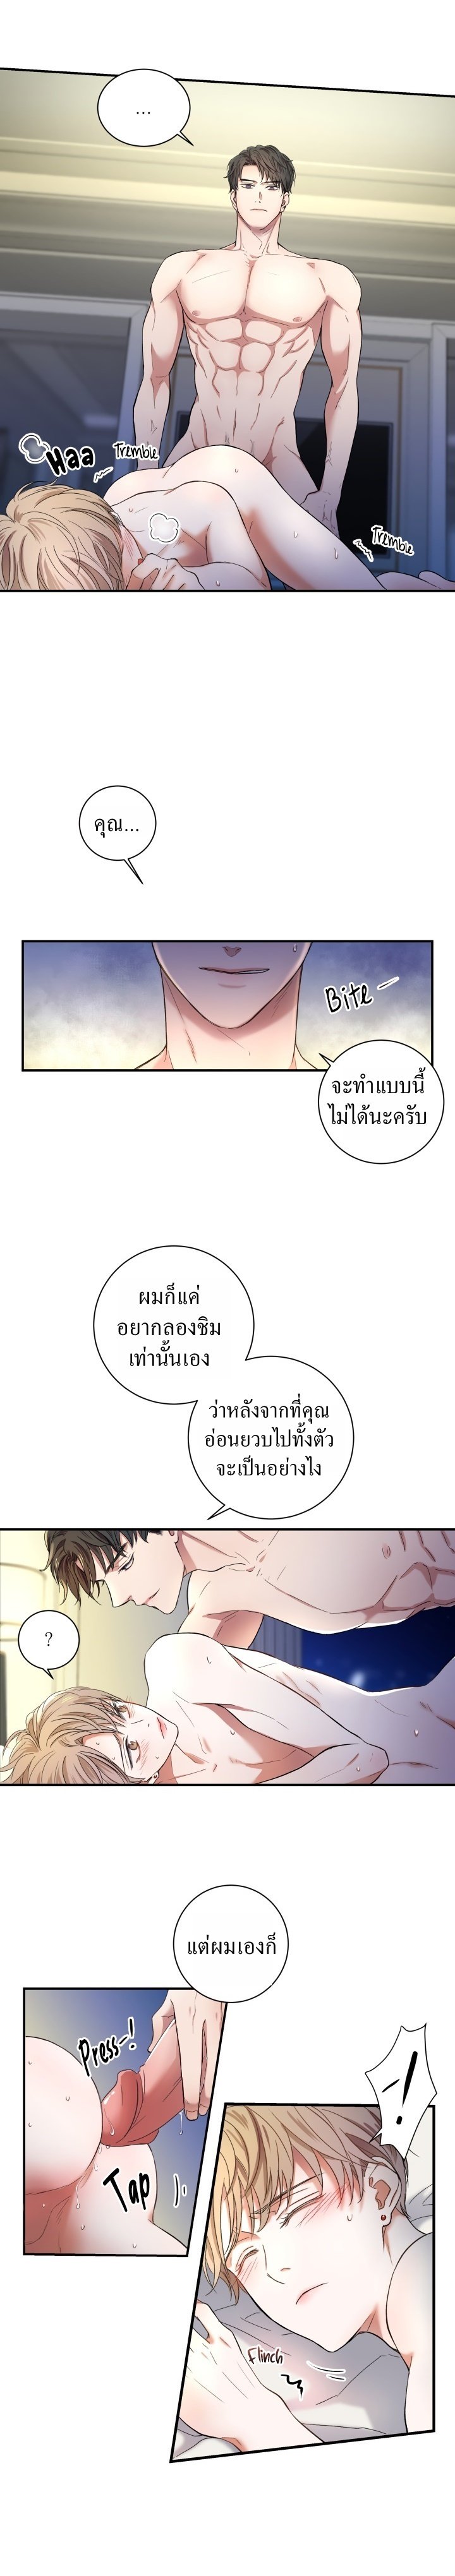 How That Guide Is Loved 1 ภาพที่ 12